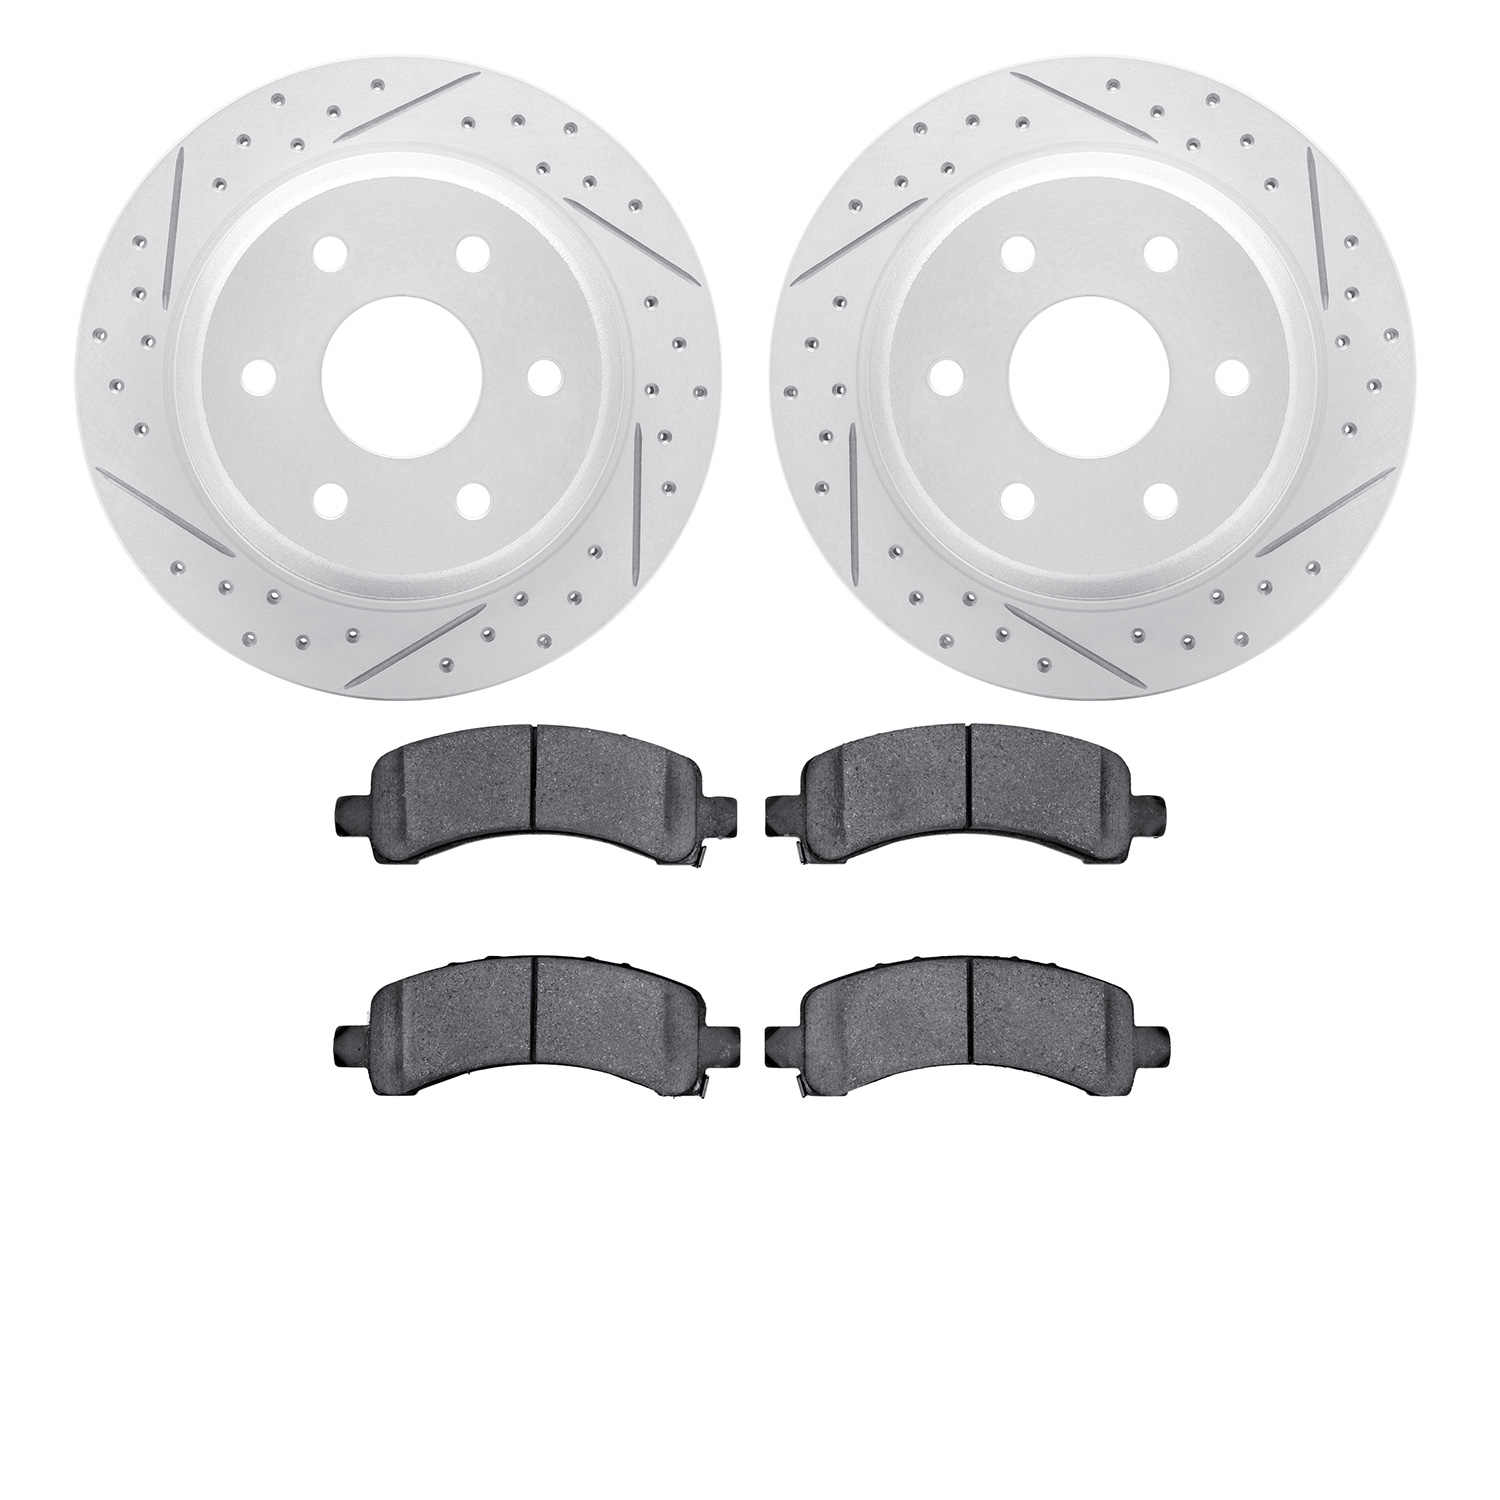 2502-48054 Geoperformance Drilled/Slotted Rotors w/5000 Advanced Brake Pads Kit, 2002-2014 GM, Position: Rear